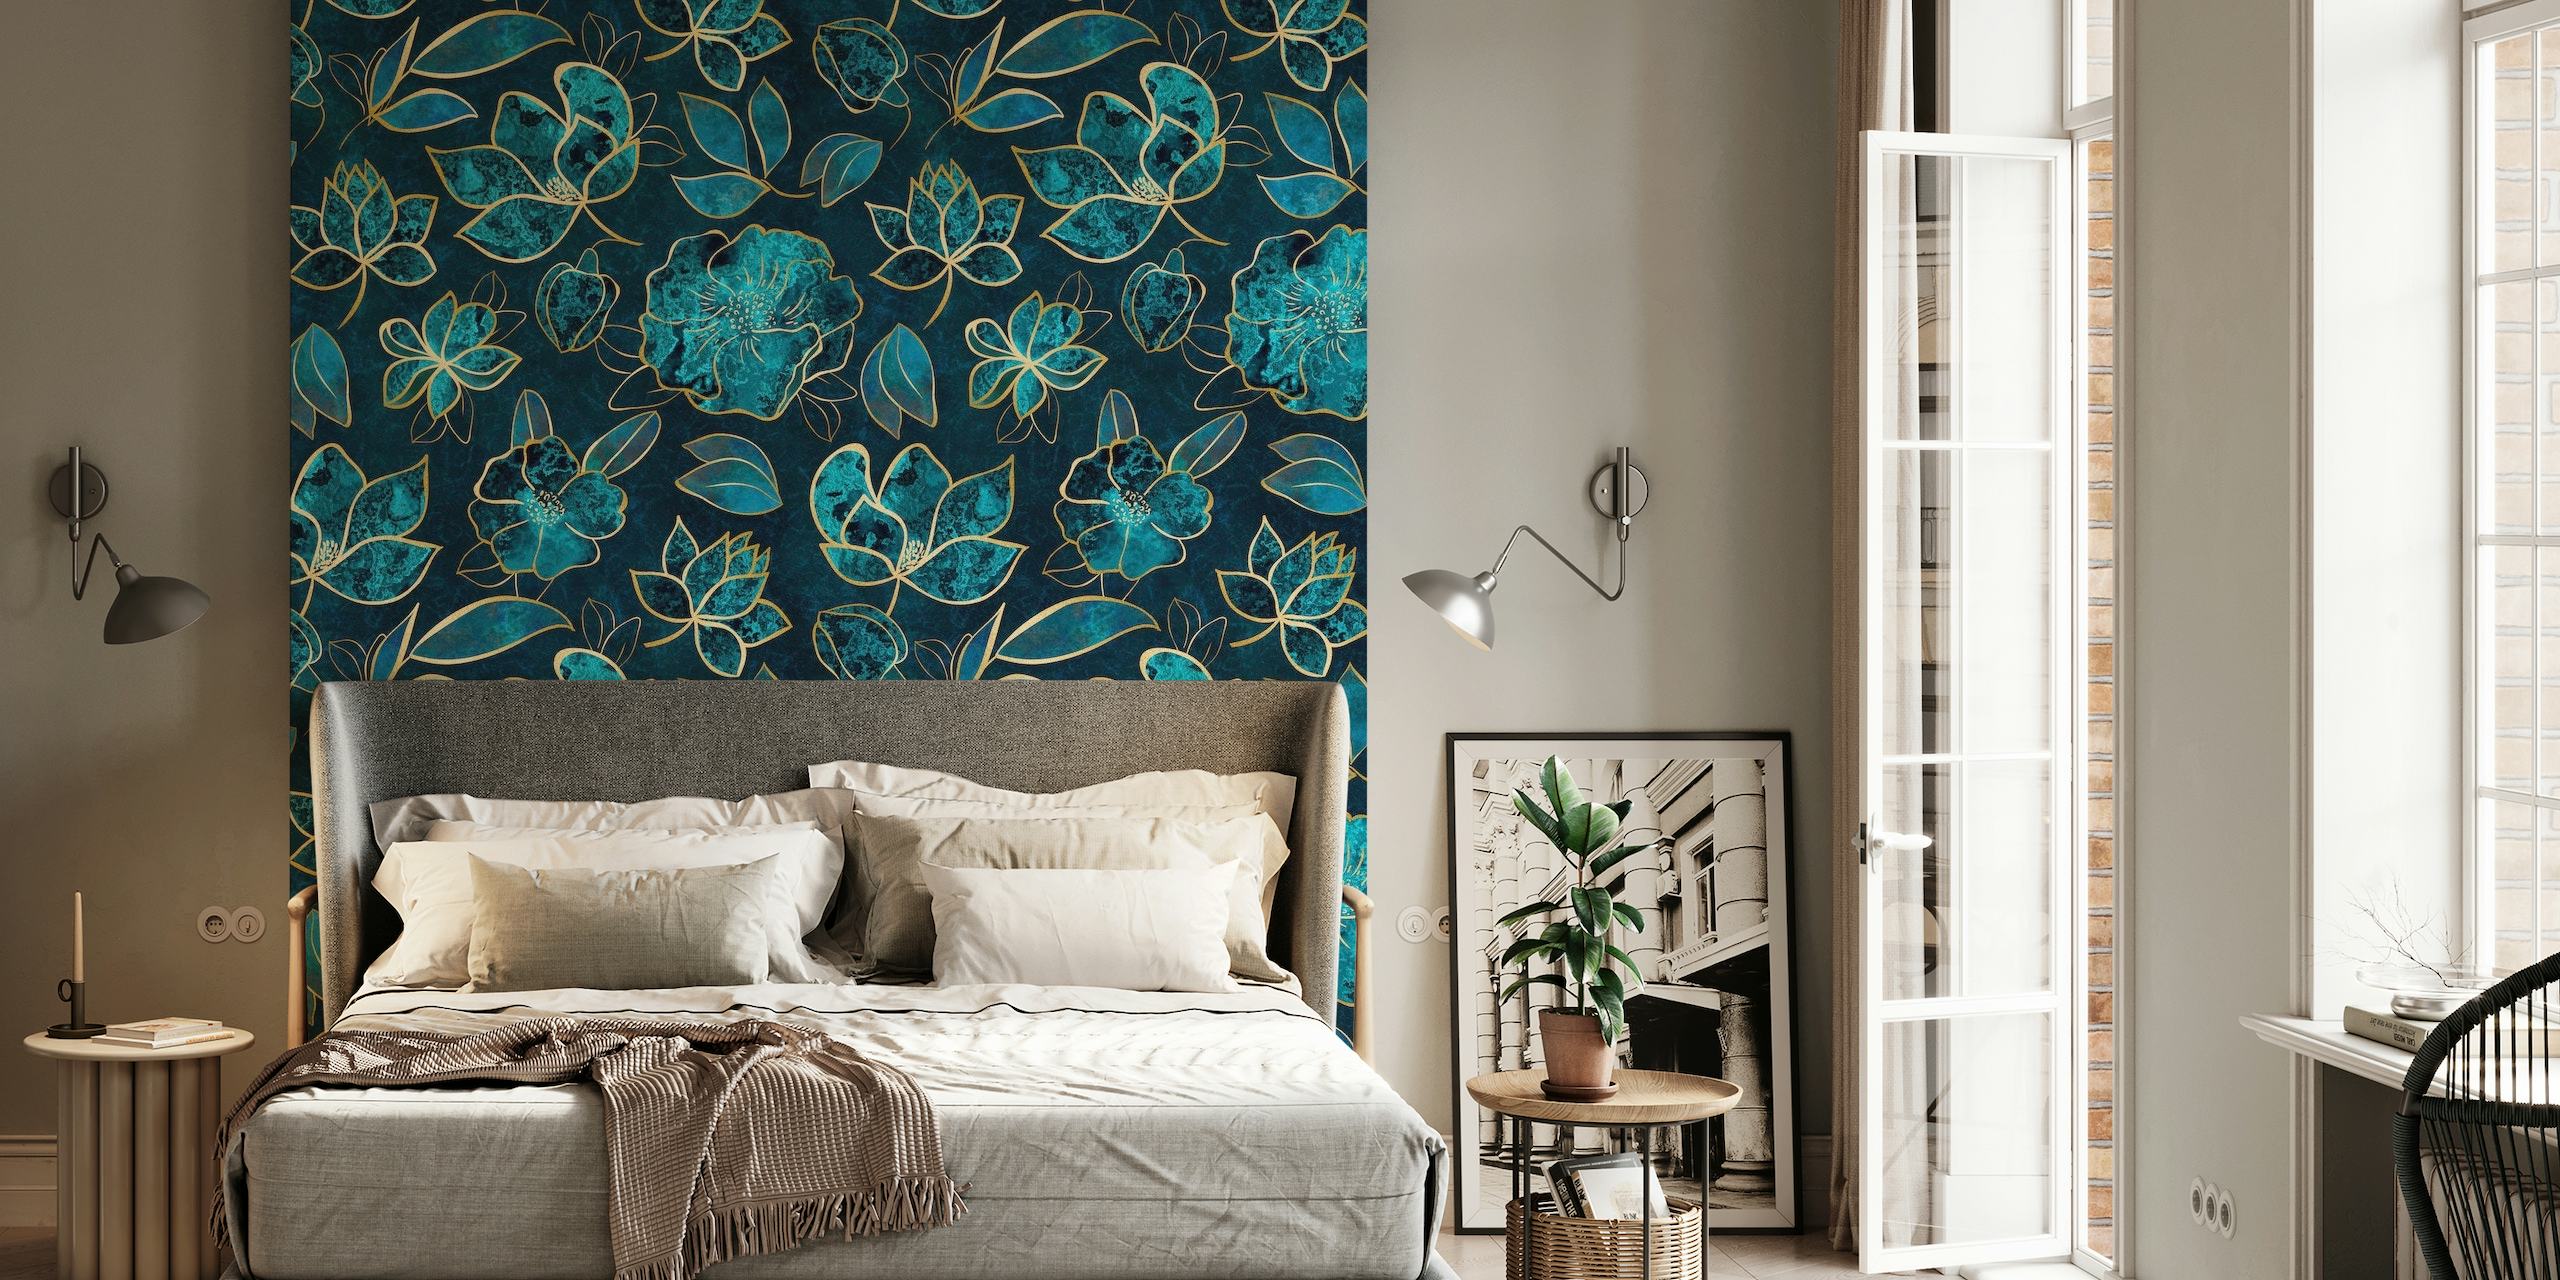 Elegant and fancy turquoise and gold floral pattern on a dark background for a wall mural.